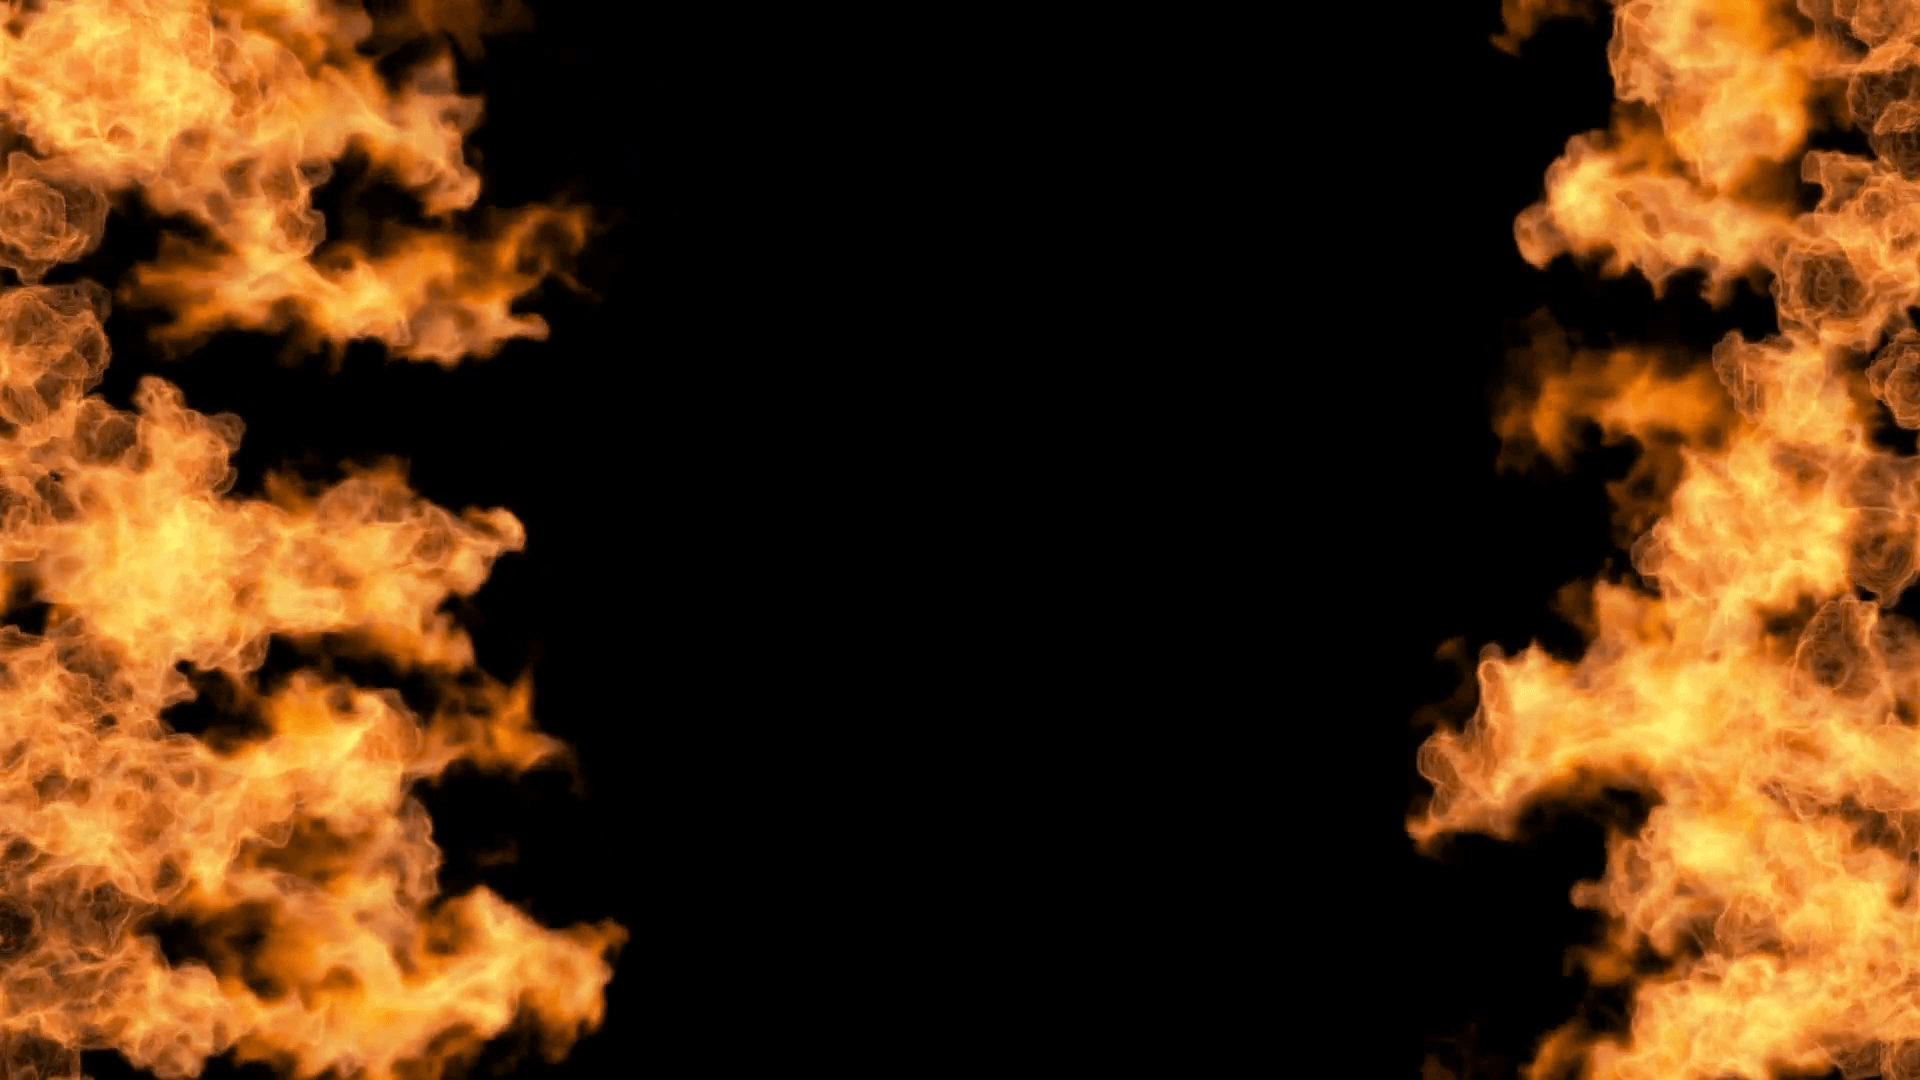 fire frame, igniting flame background isolated on black background